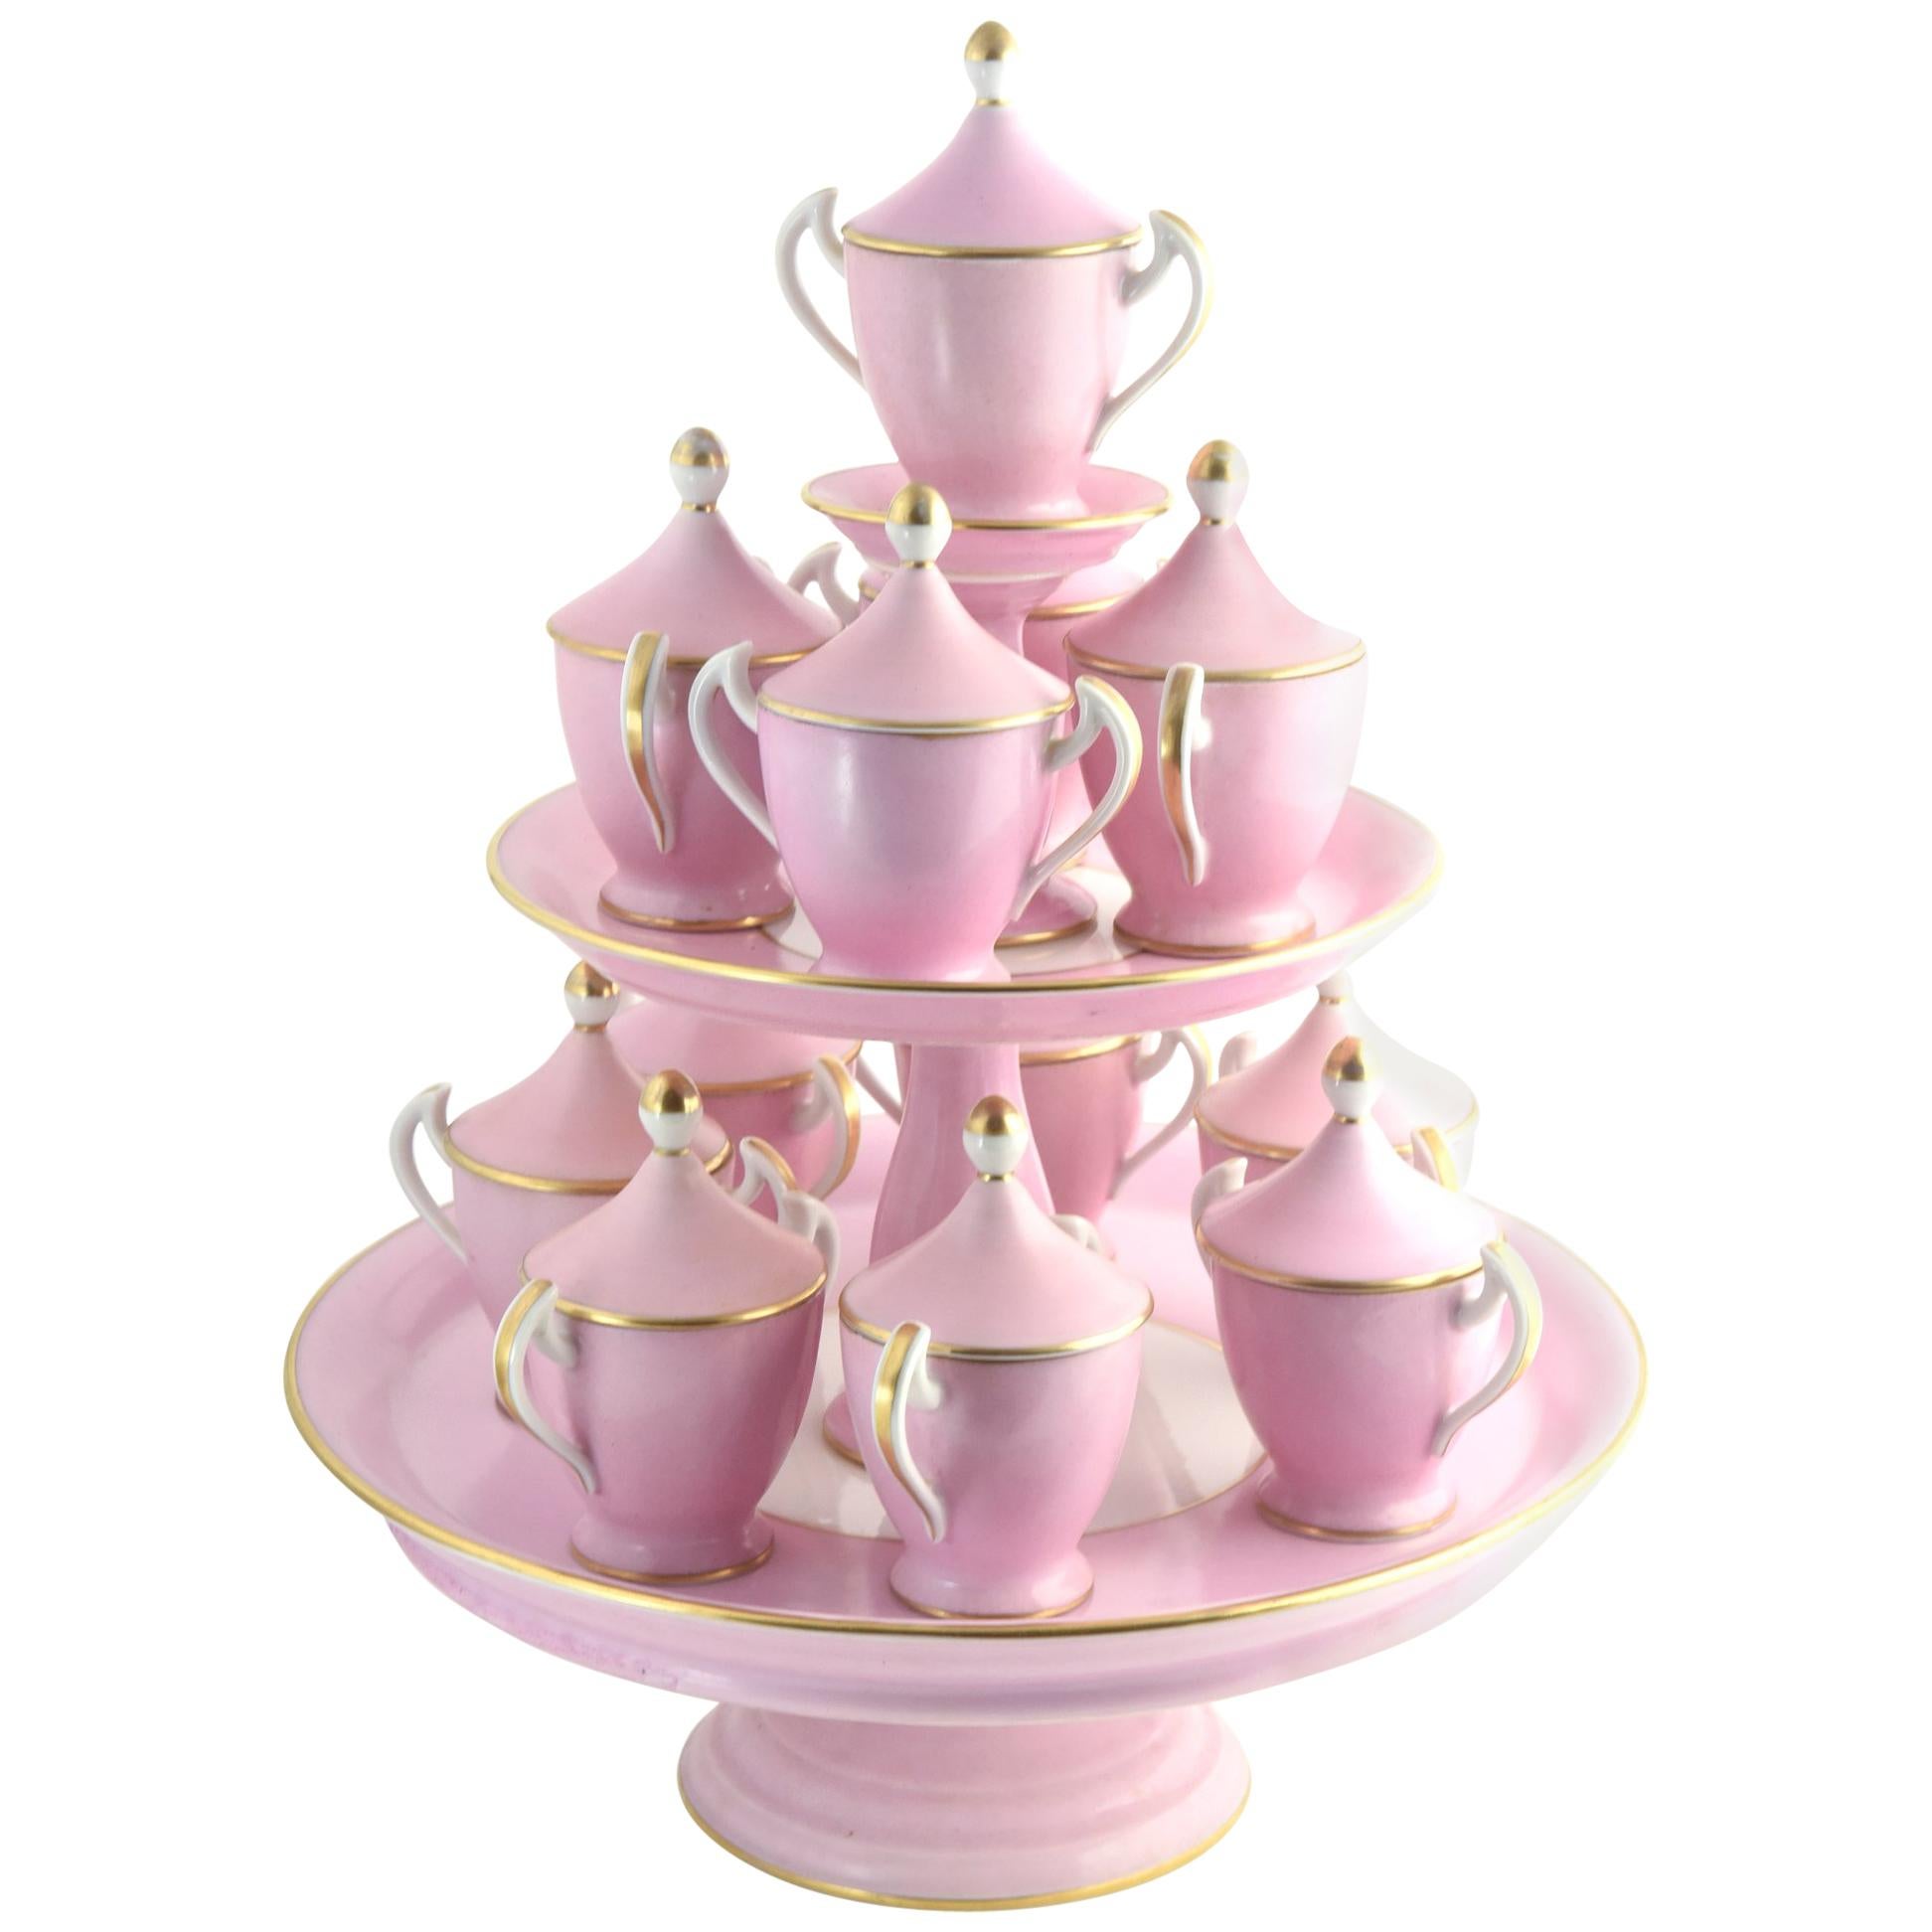 Antique Old Paris Pink and White Pots de Crème Set Cups with Tiered Stand